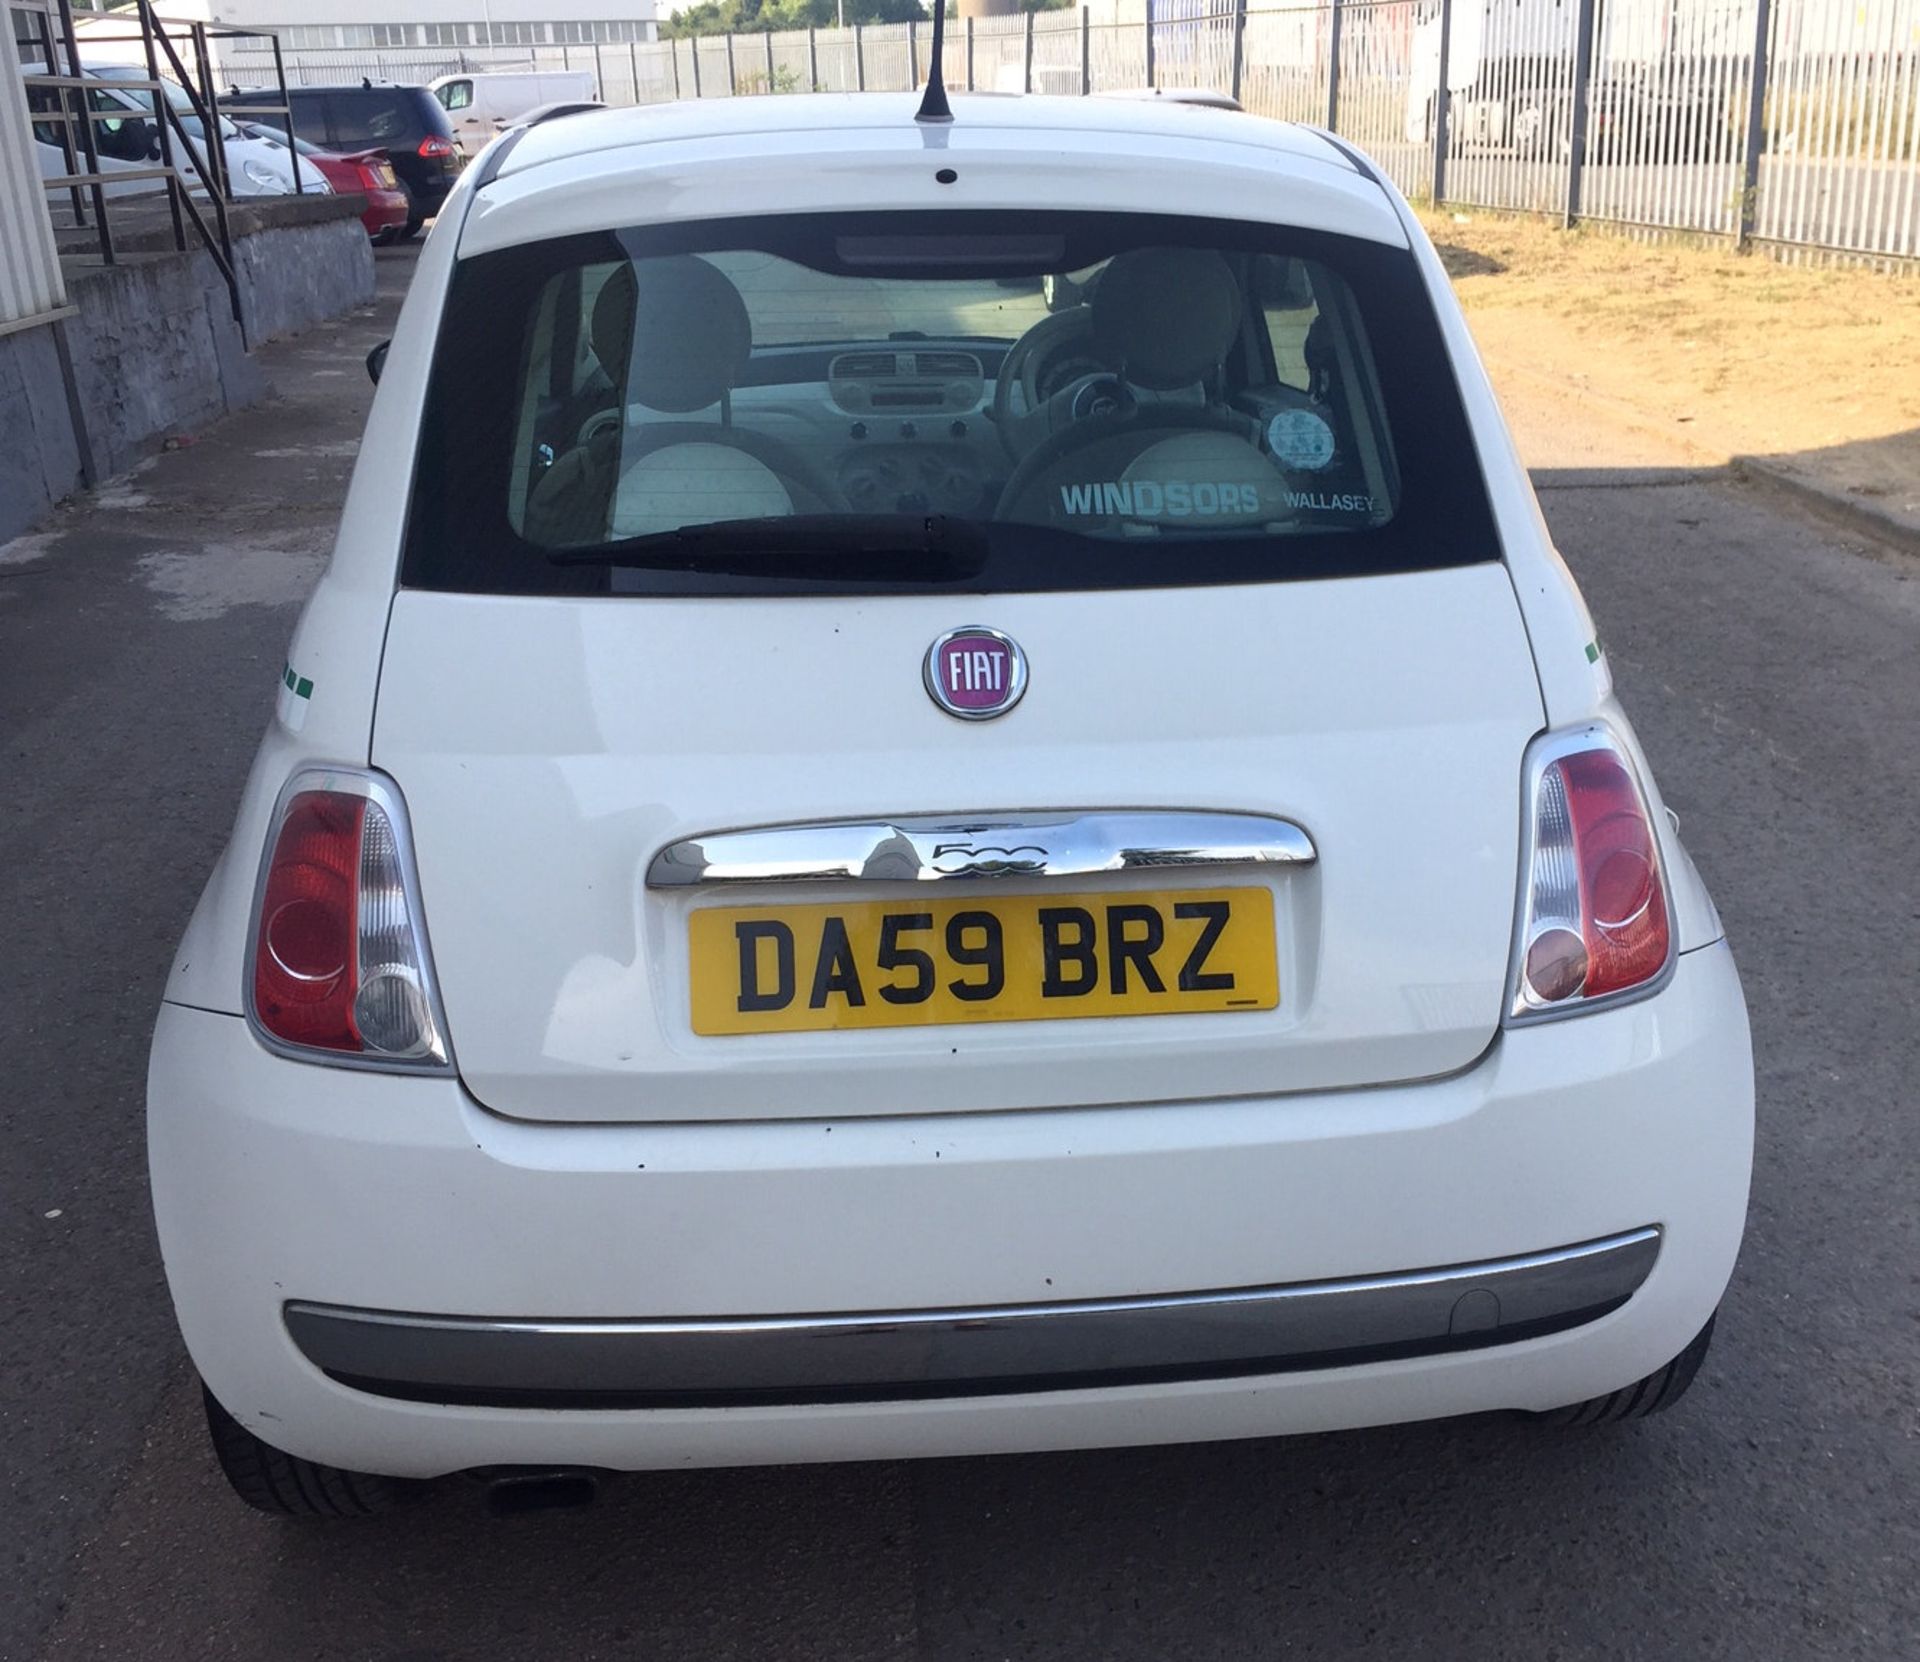 2009 Fiat 500 1.2 Lounge 3 Dr Hatchback - CL505 - NO VAT ON THE HAMMER - Location: Corby, Northampto - Image 12 of 12